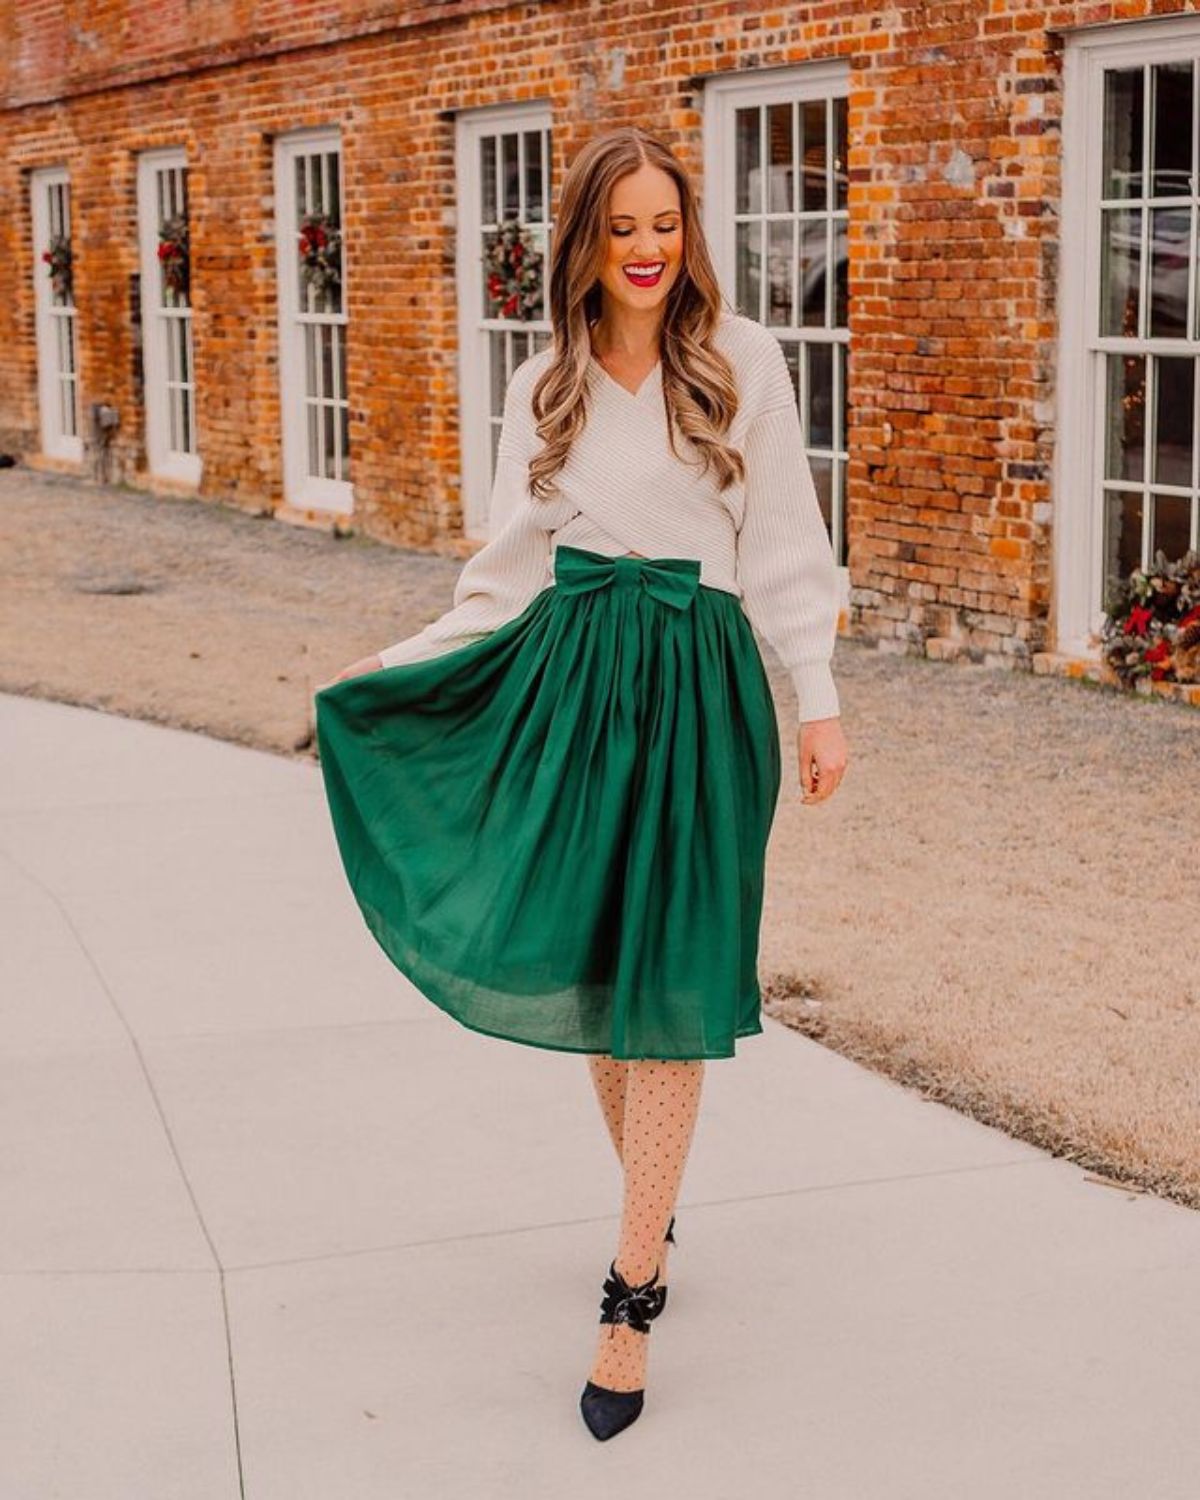 holiday outfit with loose white top, green skirt with a bow, and heels